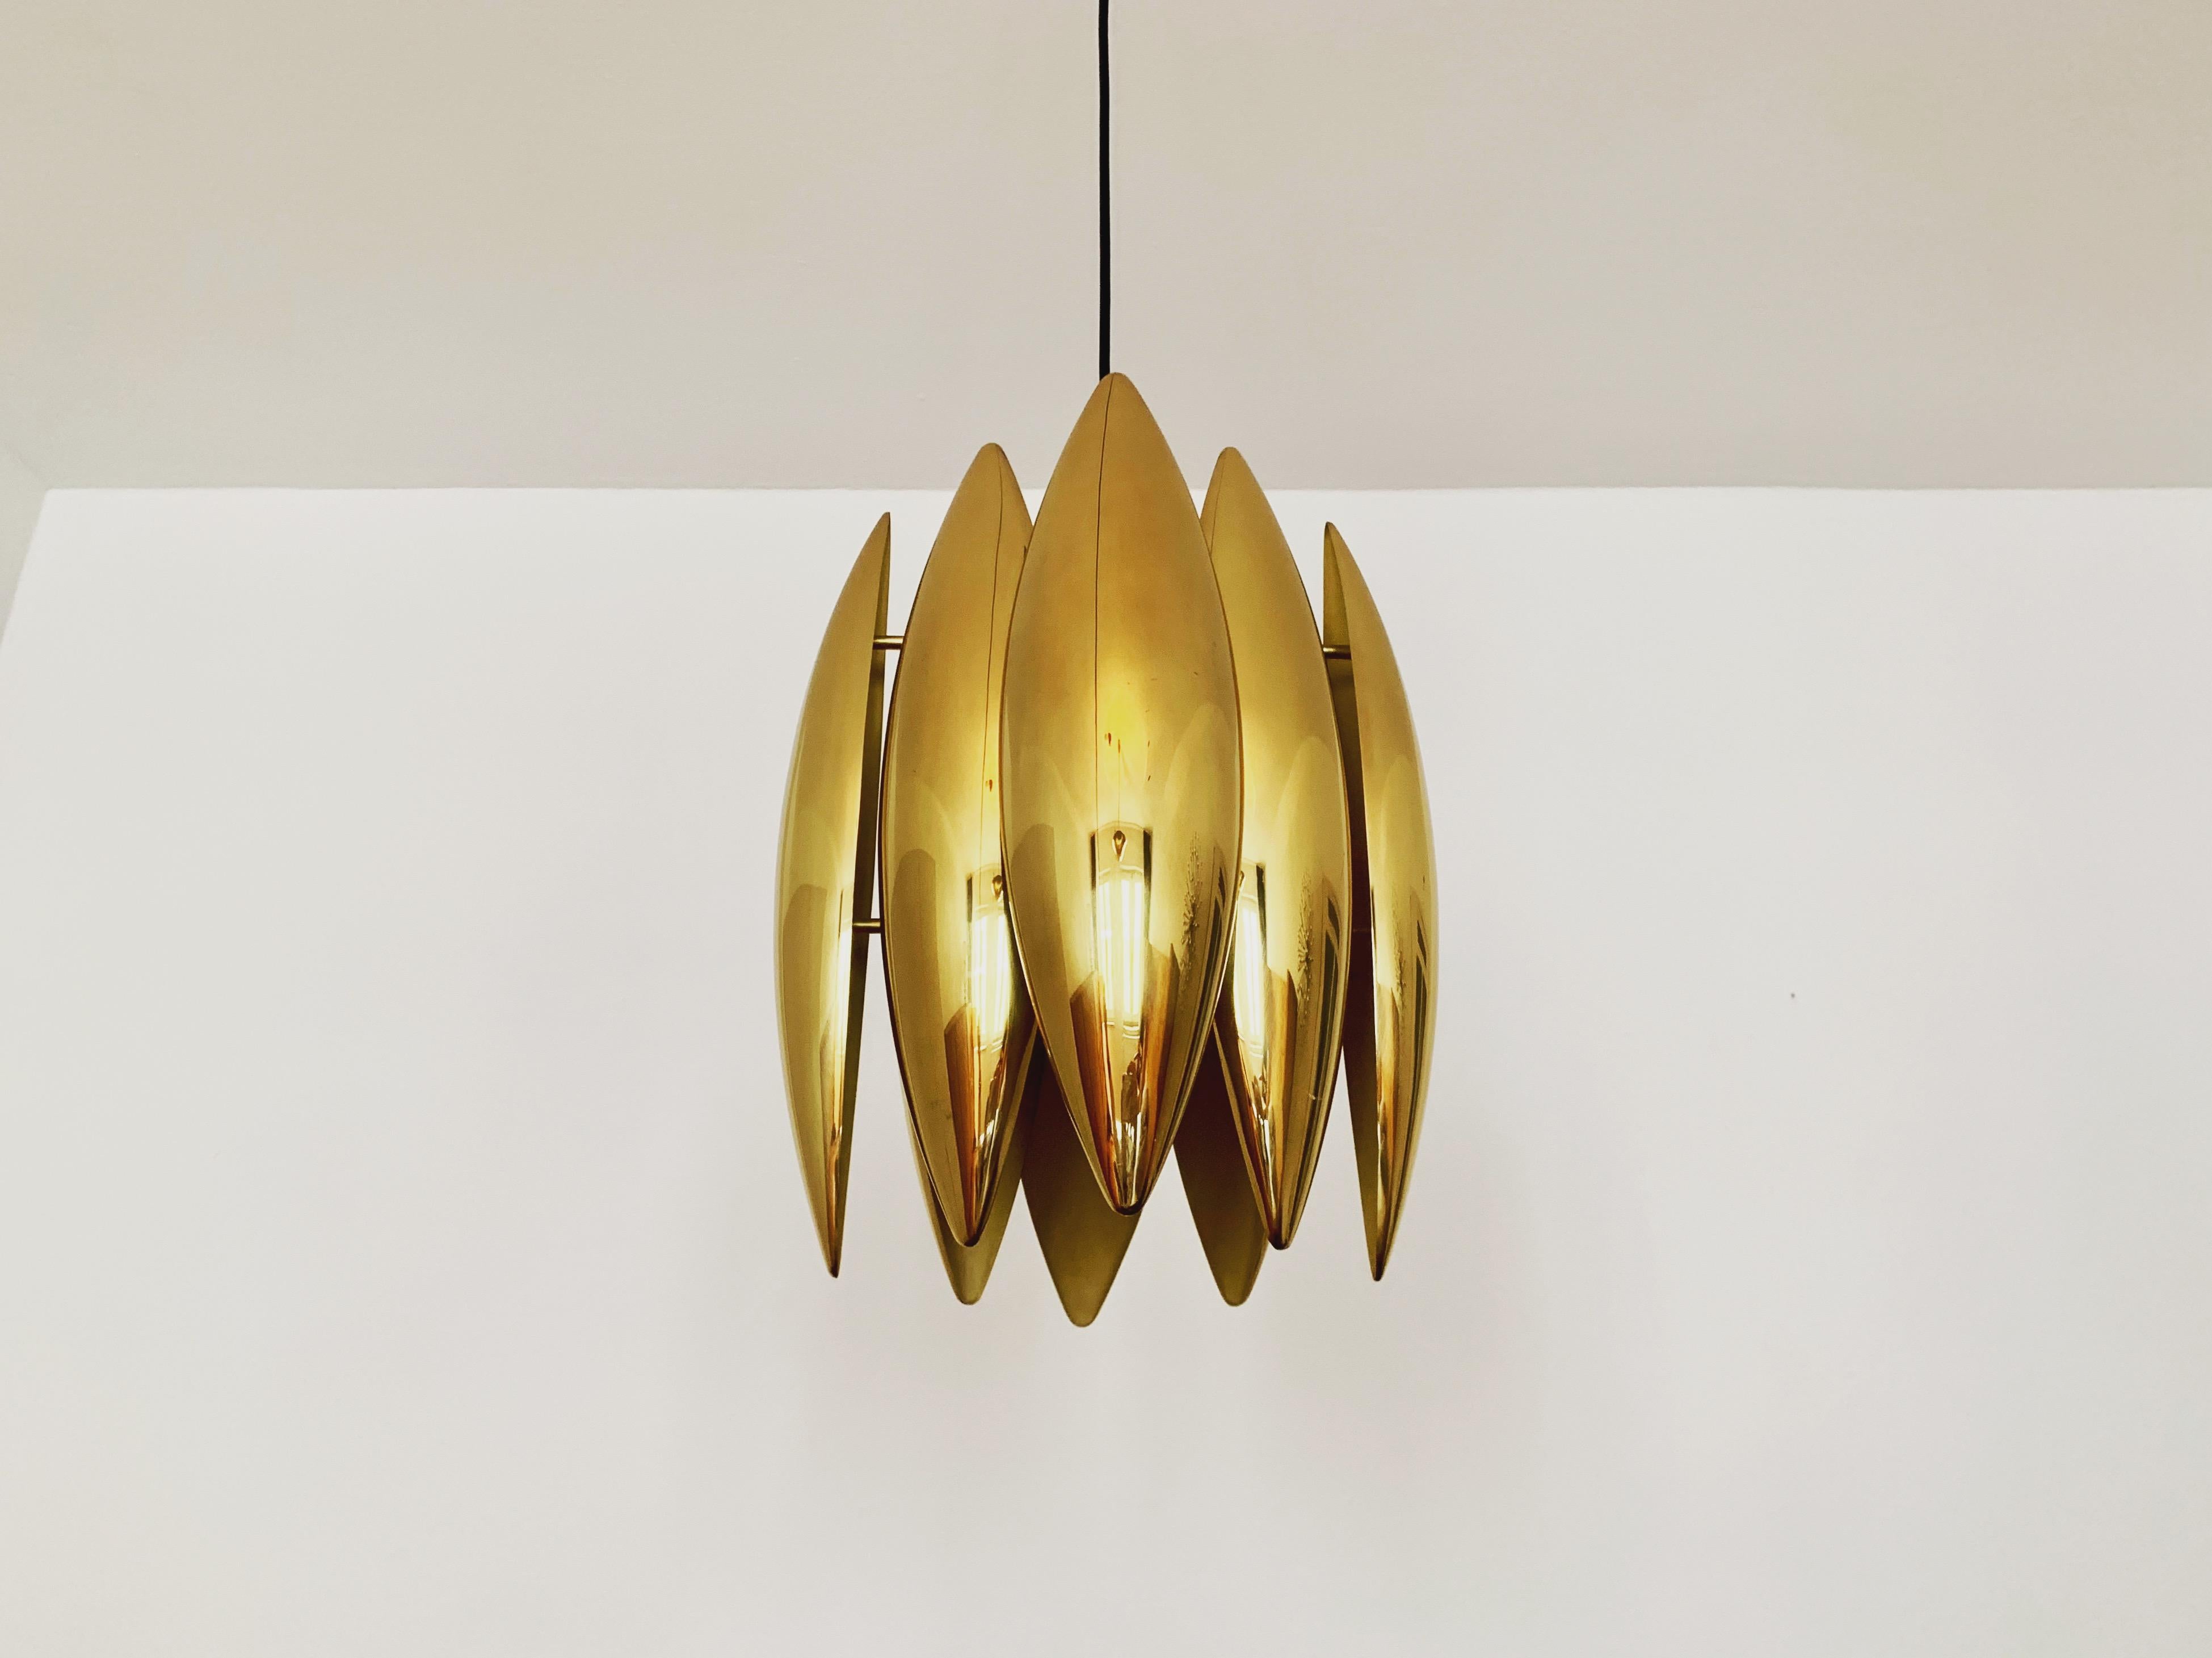 Very beautiful and impressive Kastor pendant lamp from the 1960s.
Impressively beautiful and contemporary design.
A spectacular play of light is created in the room.

Manufacturer: Fog and Morup
Design: Jo Hammerborg

Condition:

Very good